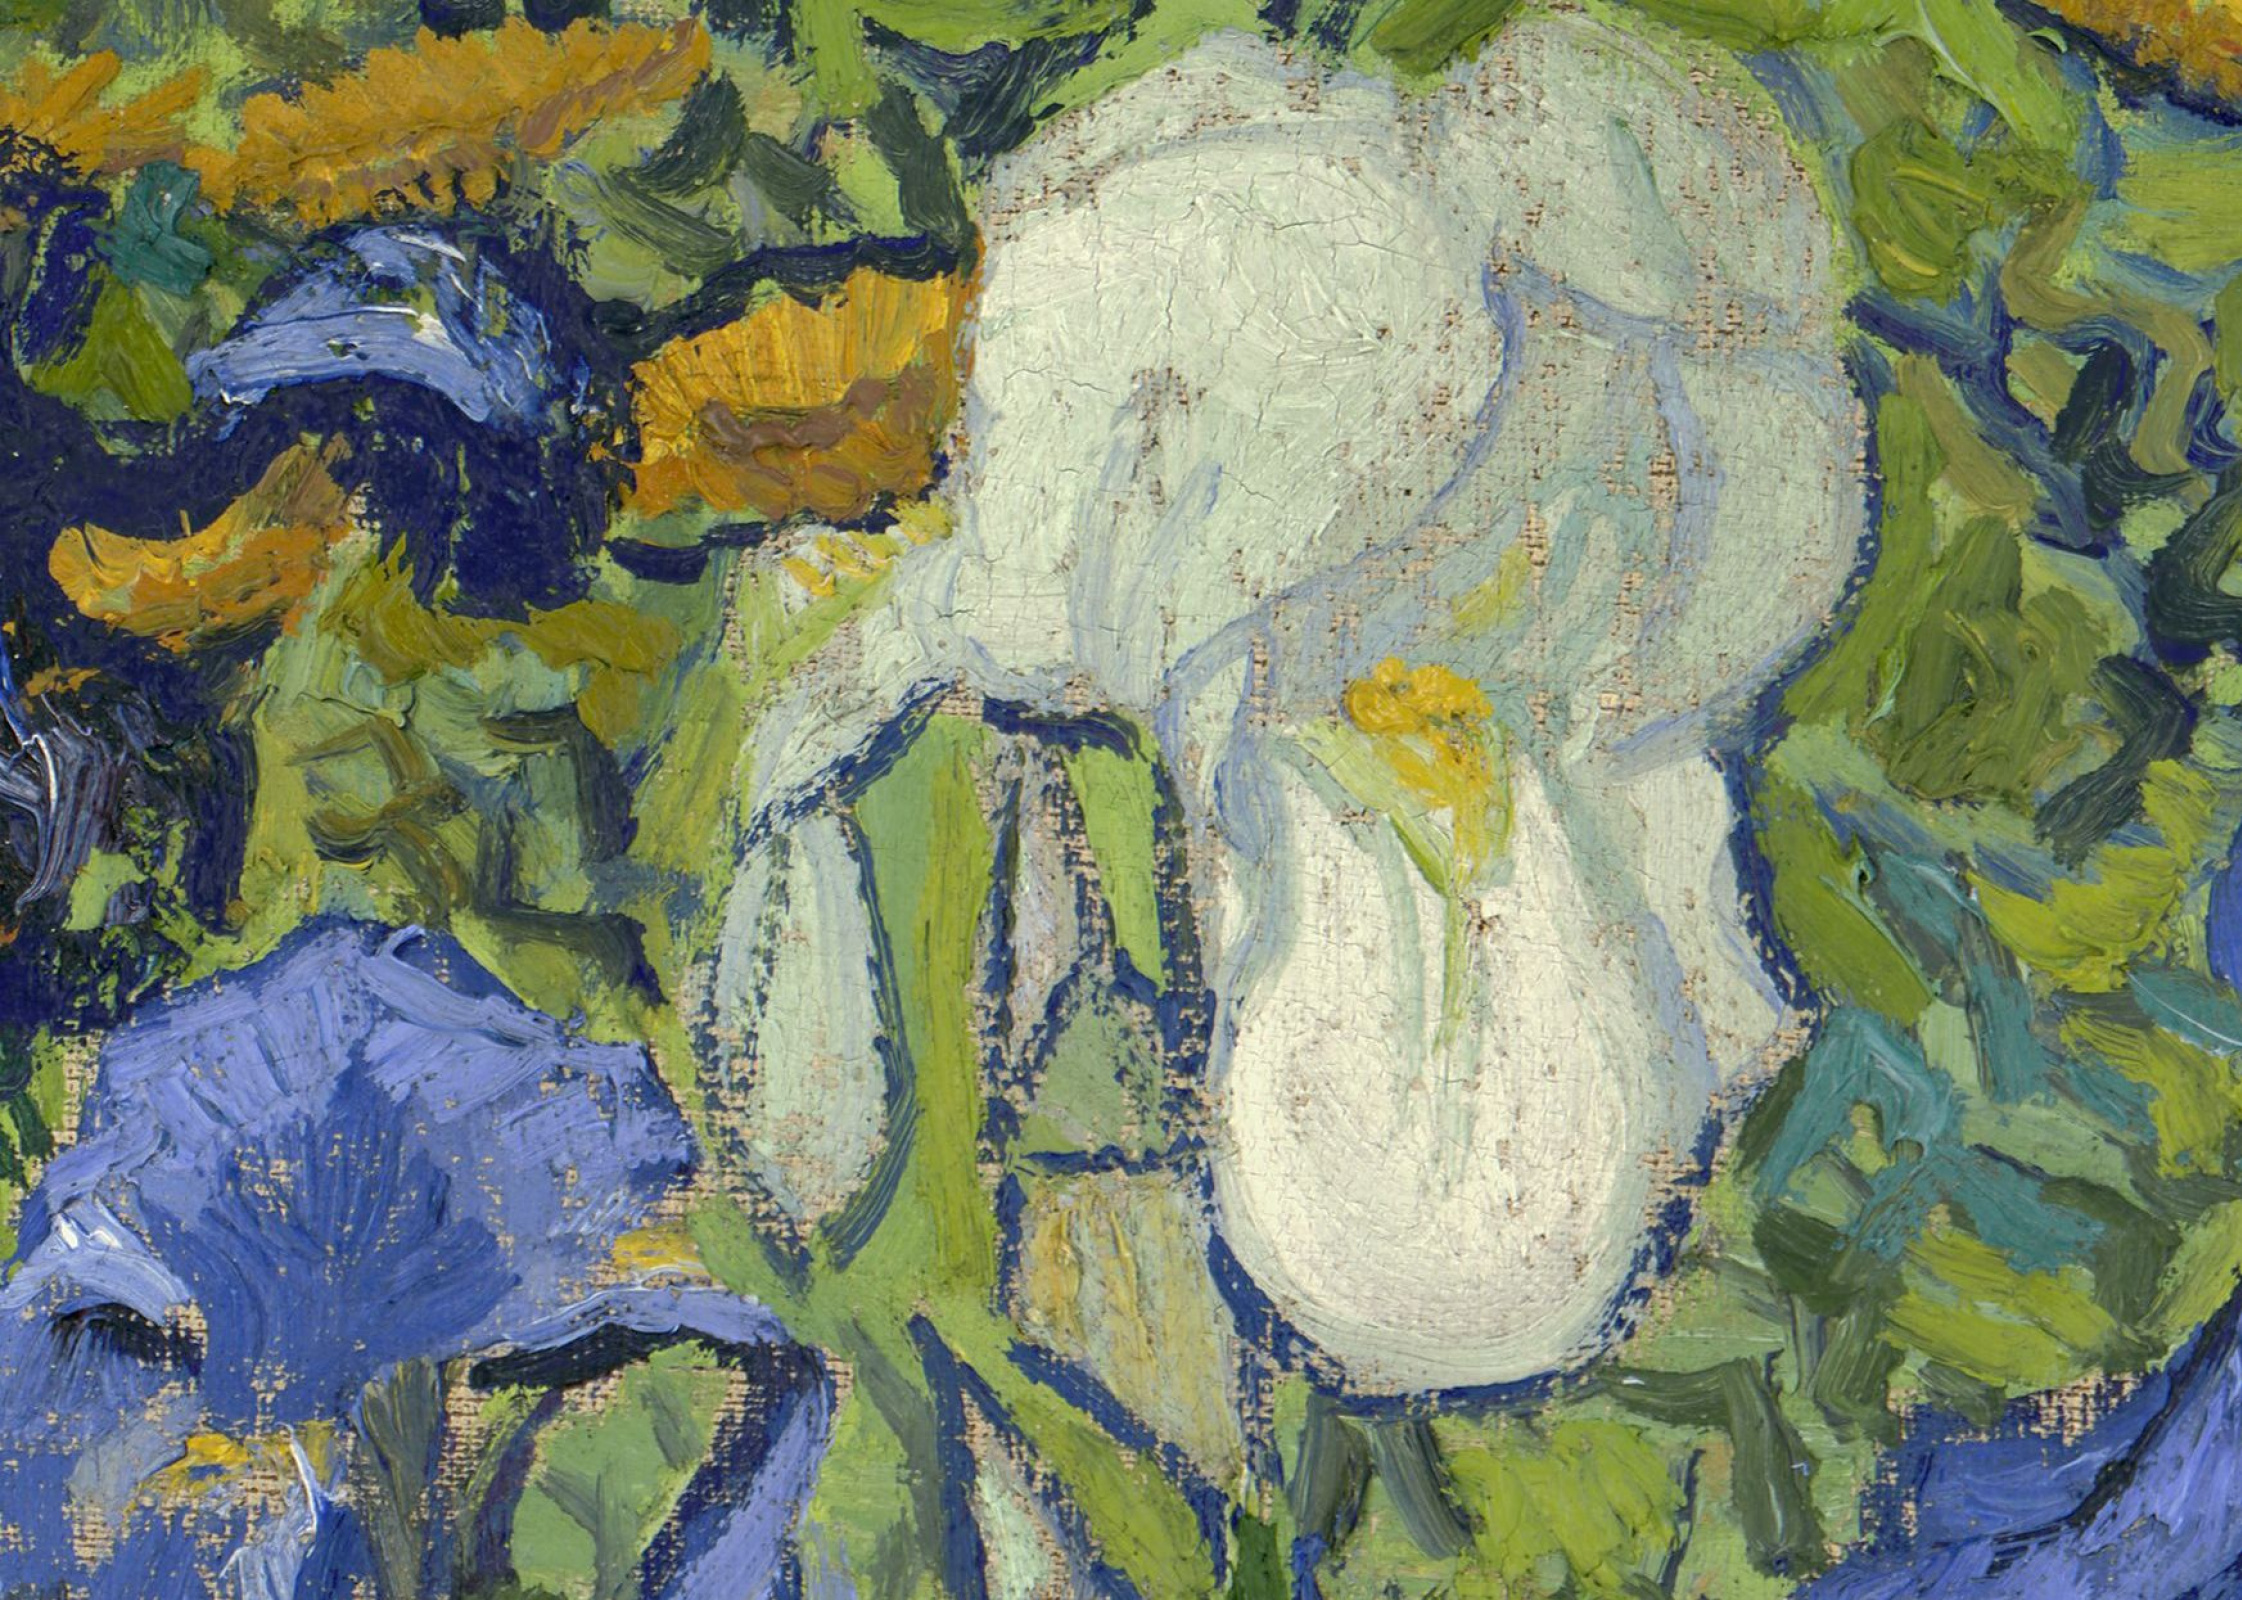 Don't Feel Sorry for Vincent van Gogh, by Courtney Abruzzo